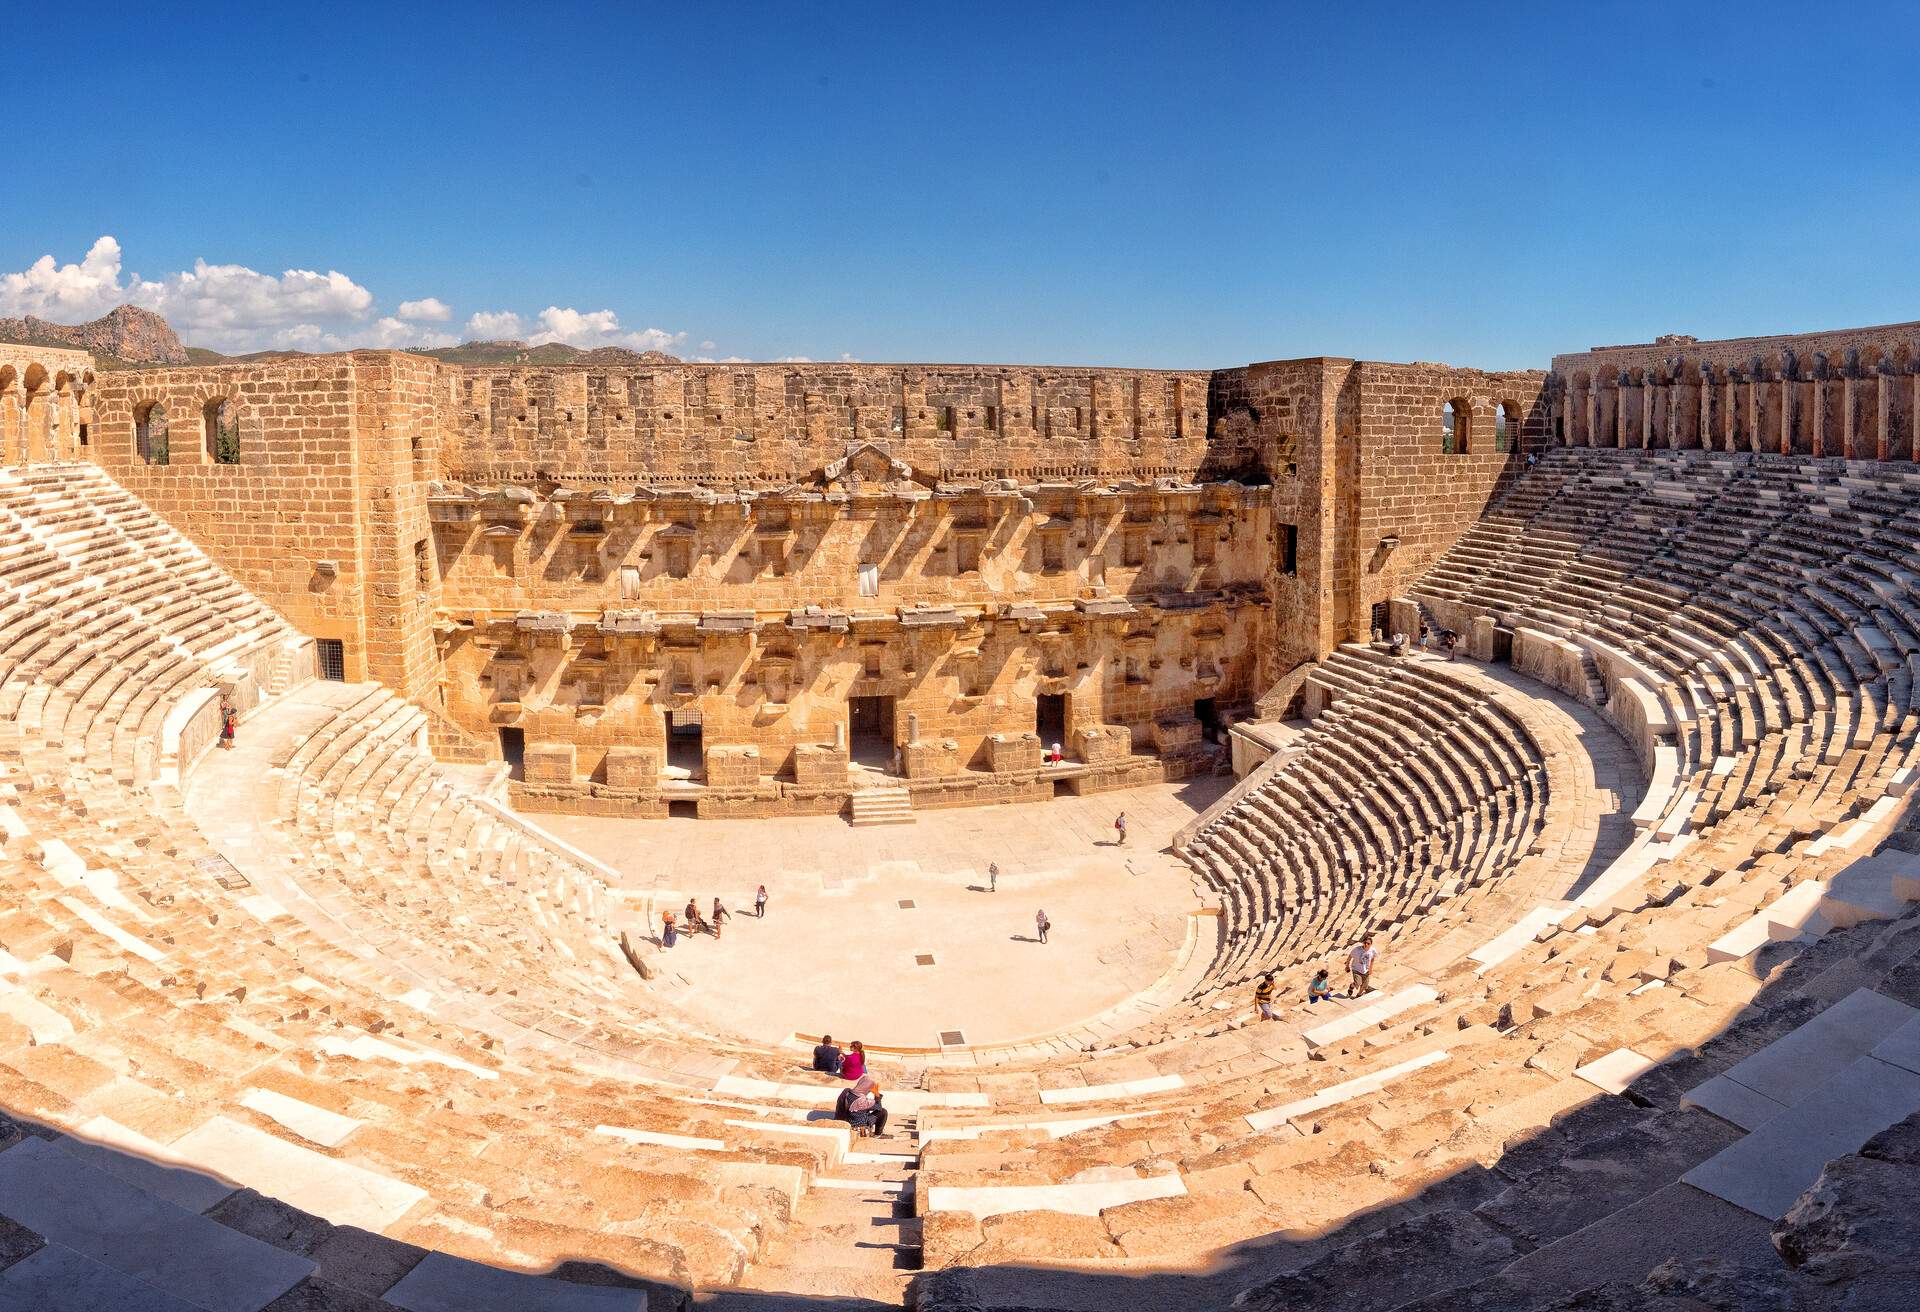 Aspendos or Aspendus was an ancient Greco-Roman city in Antalya province of Turkey.